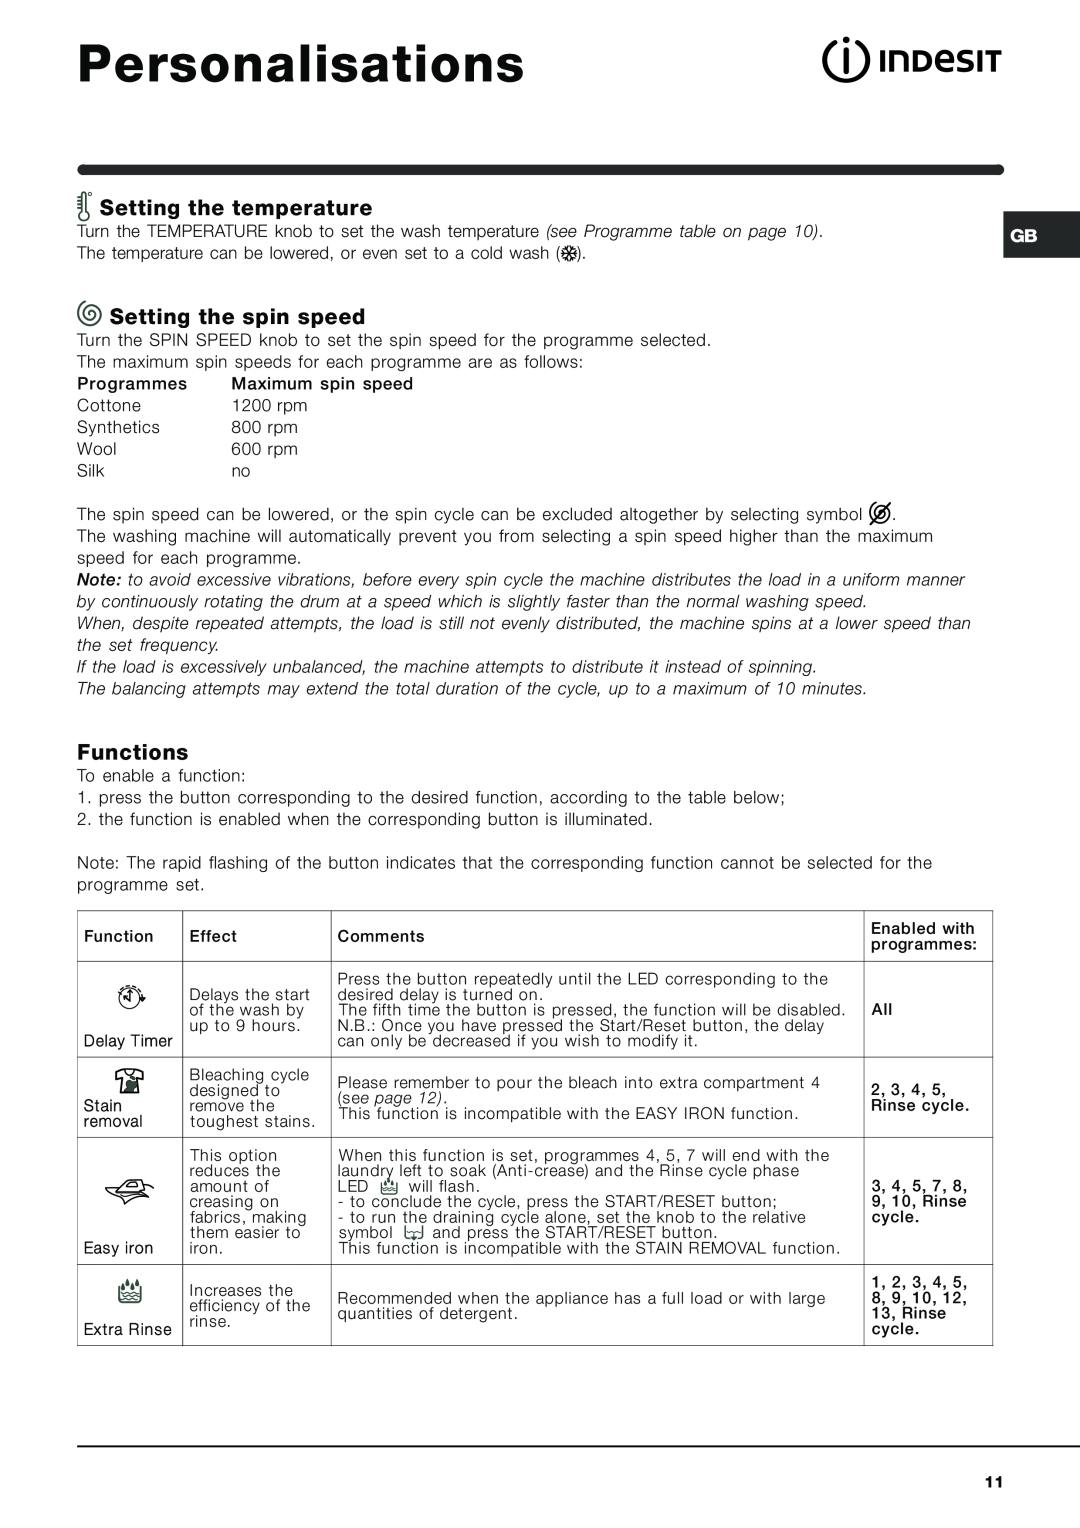 Indesit IWME 126 manual Personalisations, Setting the temperature, Setting the spin speed, Functions 